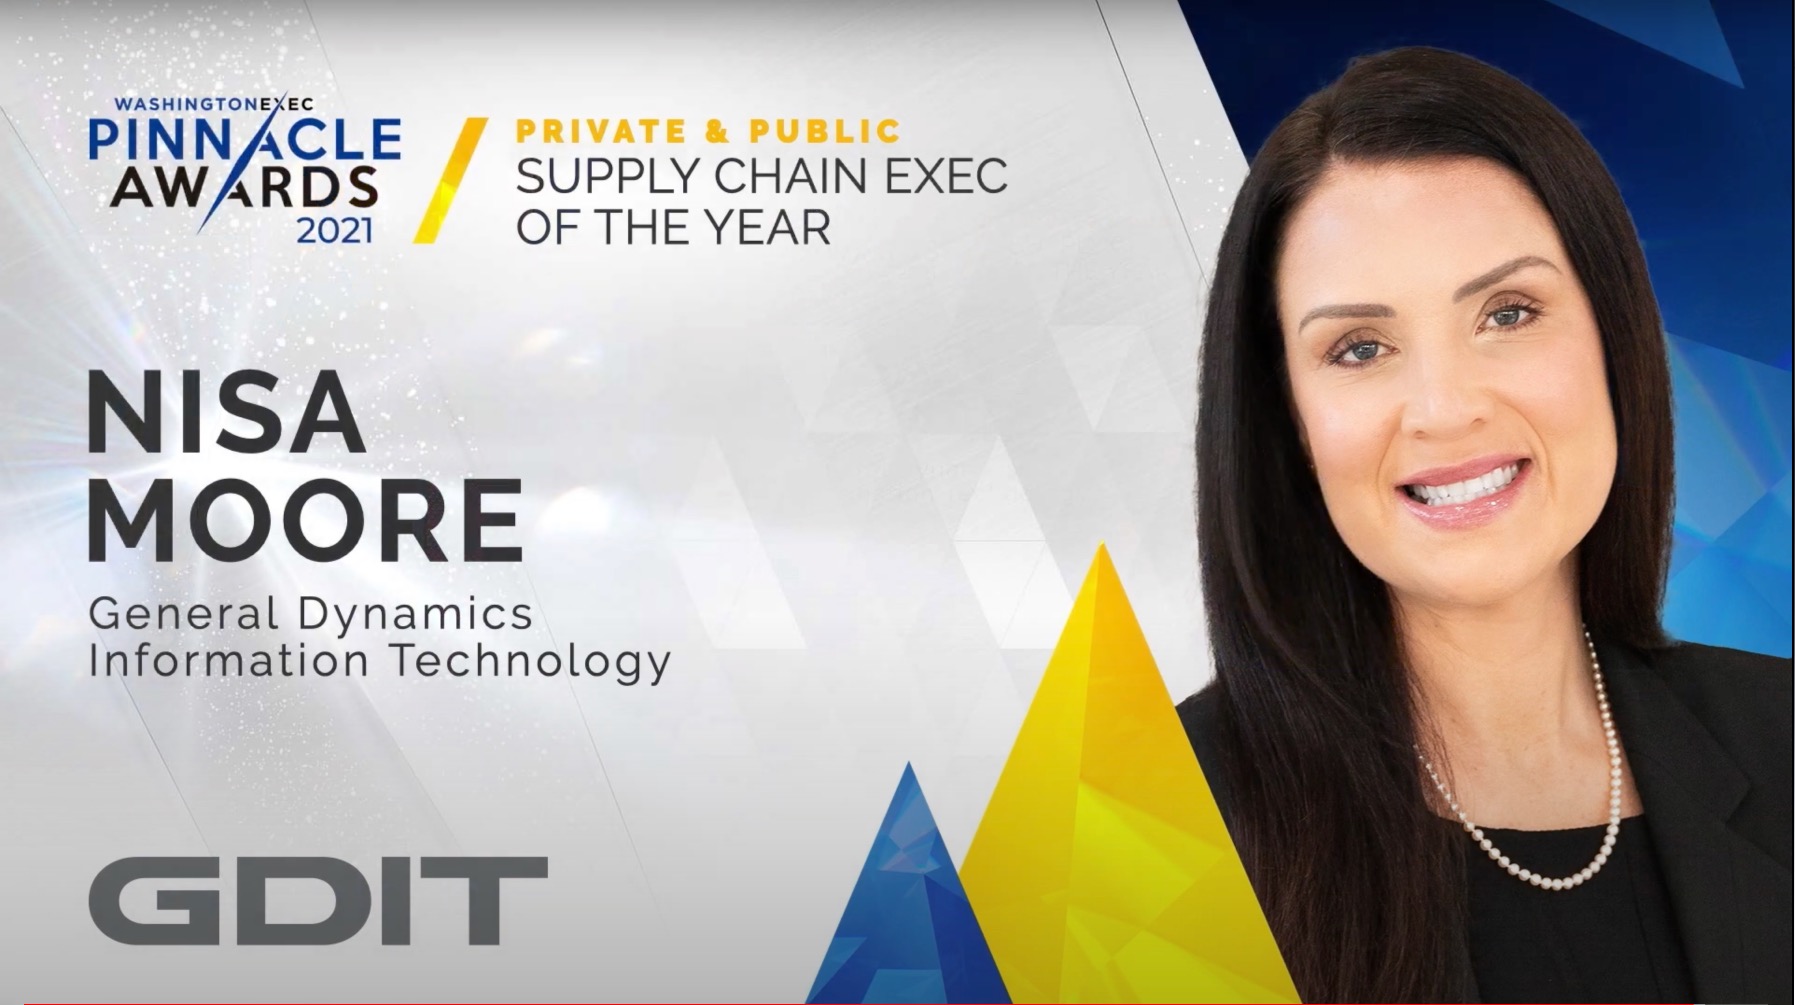 Supply Chain - Congratulations to Nisa Moore from General Dynamics Information Technology (GDIT) on winning the award for Supply Chain Executive of the Year in the Private & Public Sectors